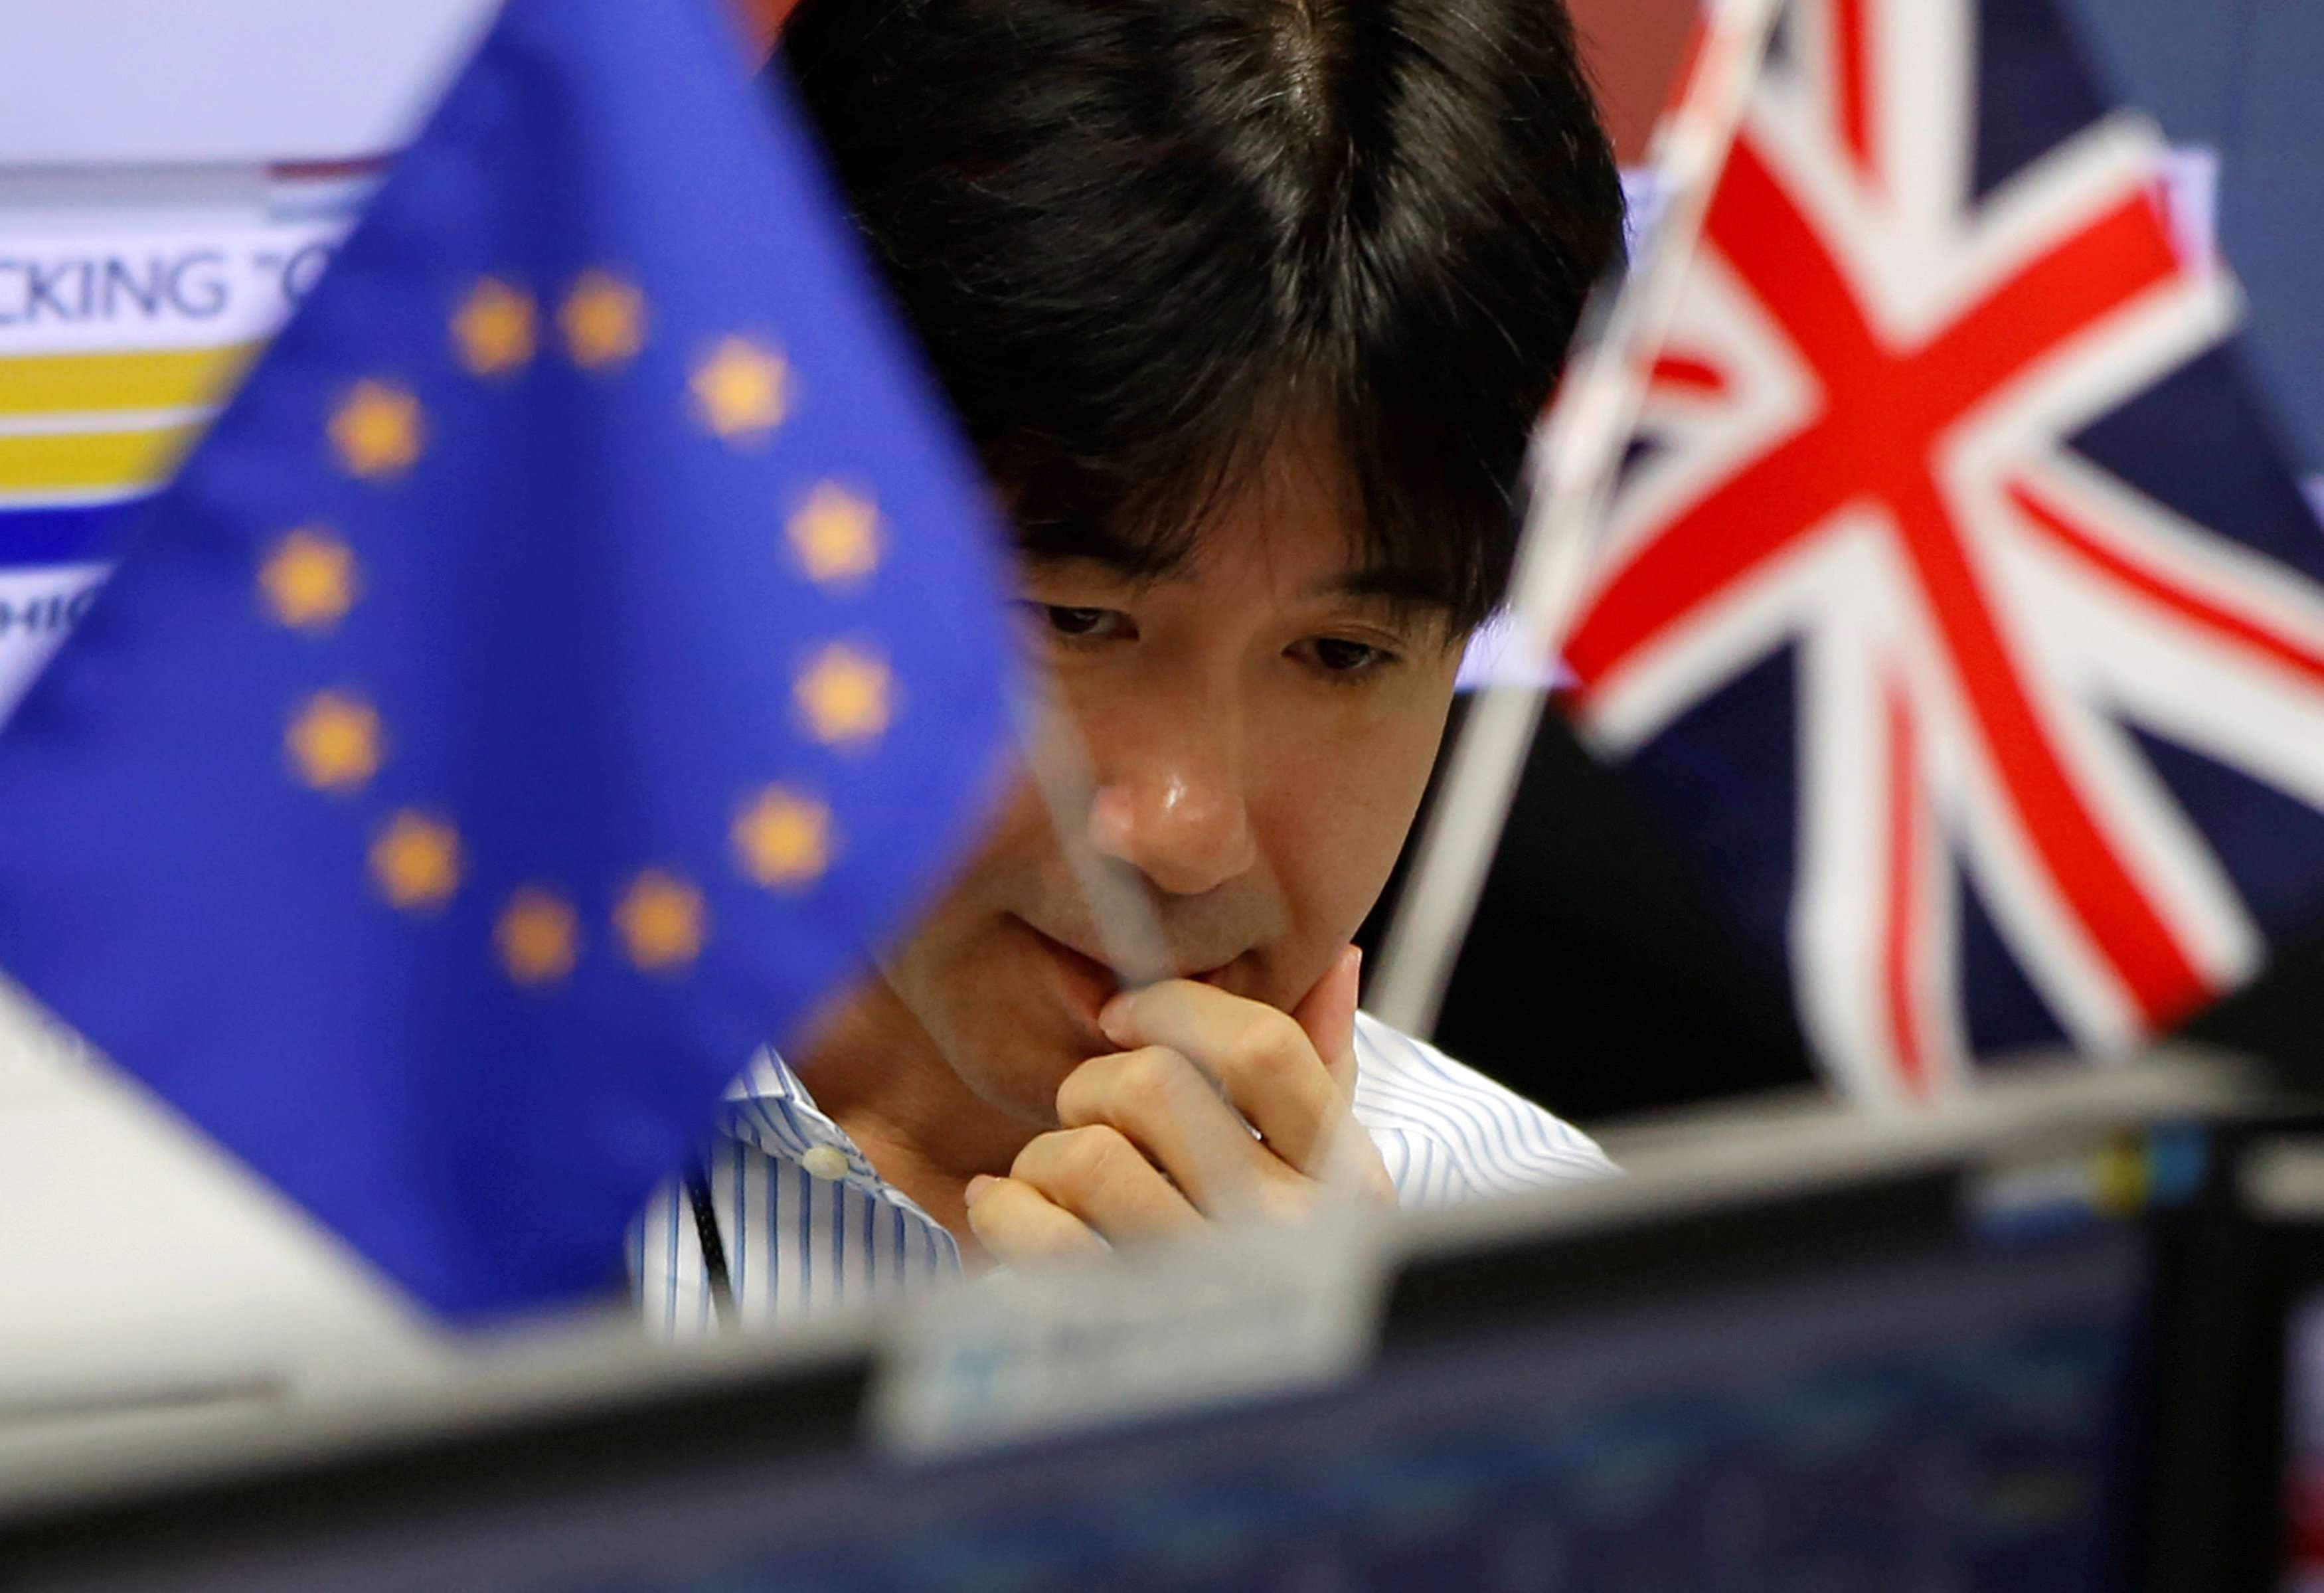 A foreign exchange worker in Tokyo, pictured between the European and British flags. Photo: Reuters